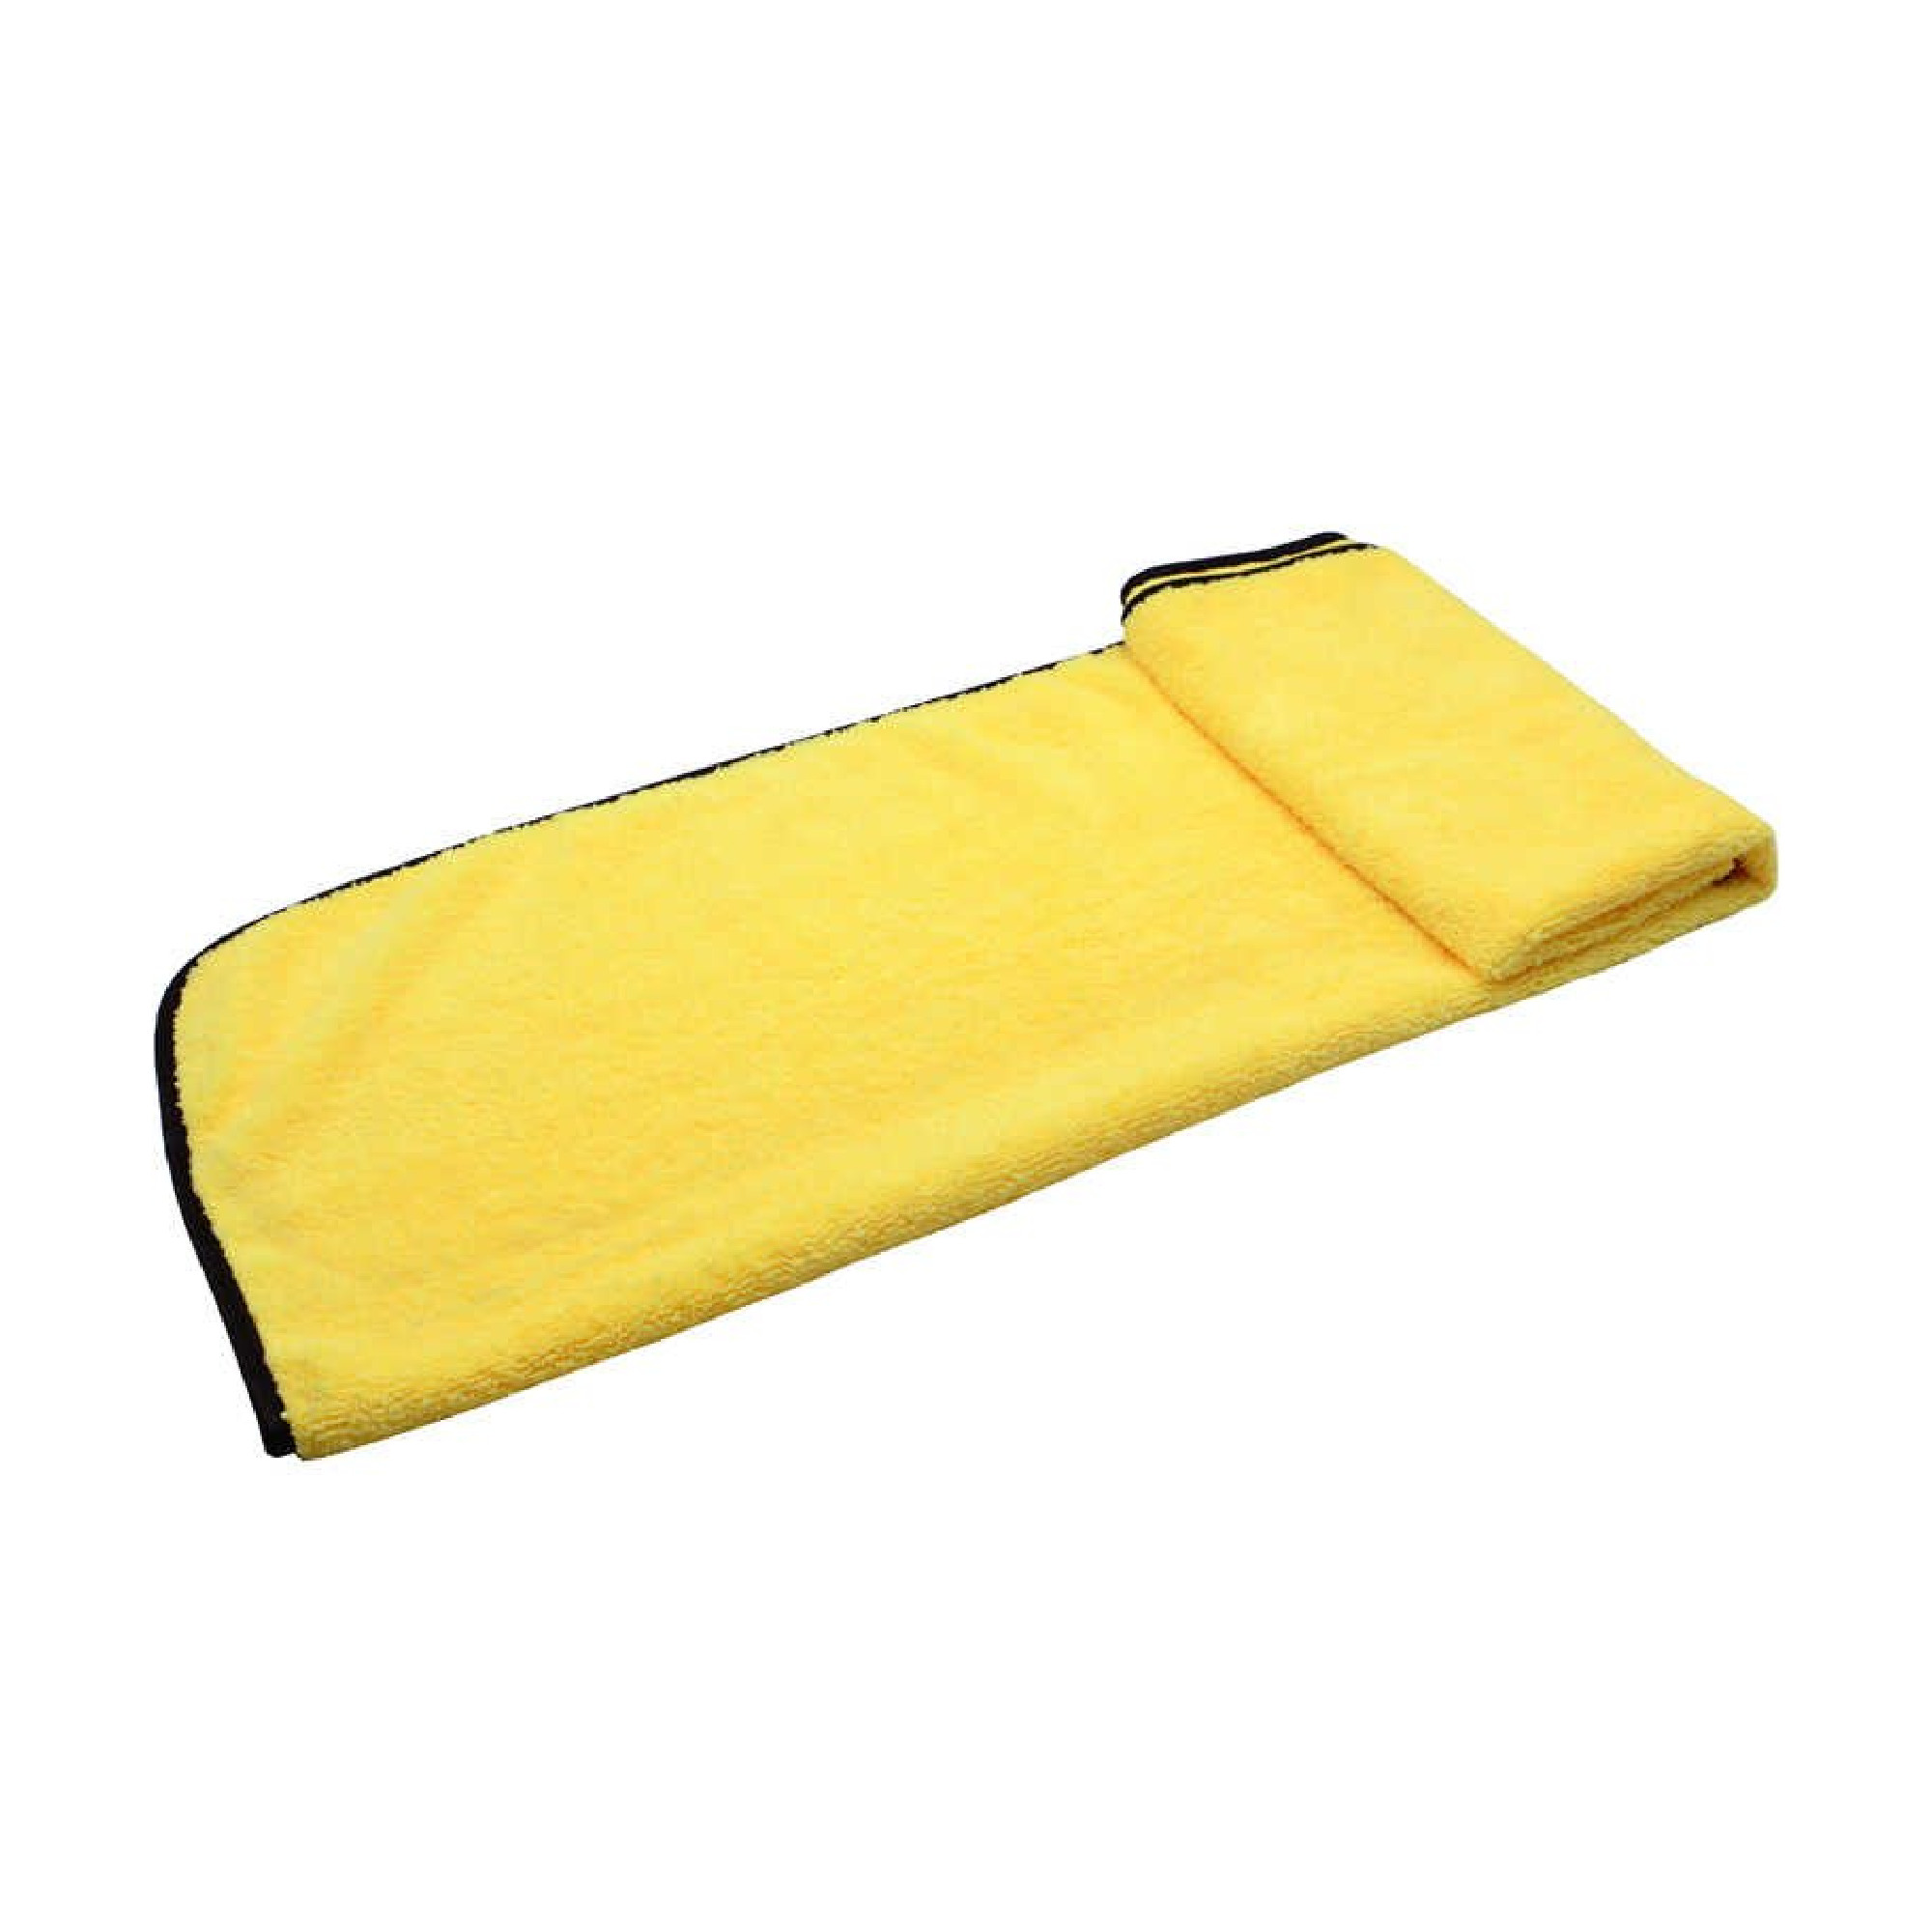 Large microfibre towel perfect for drying and polishing